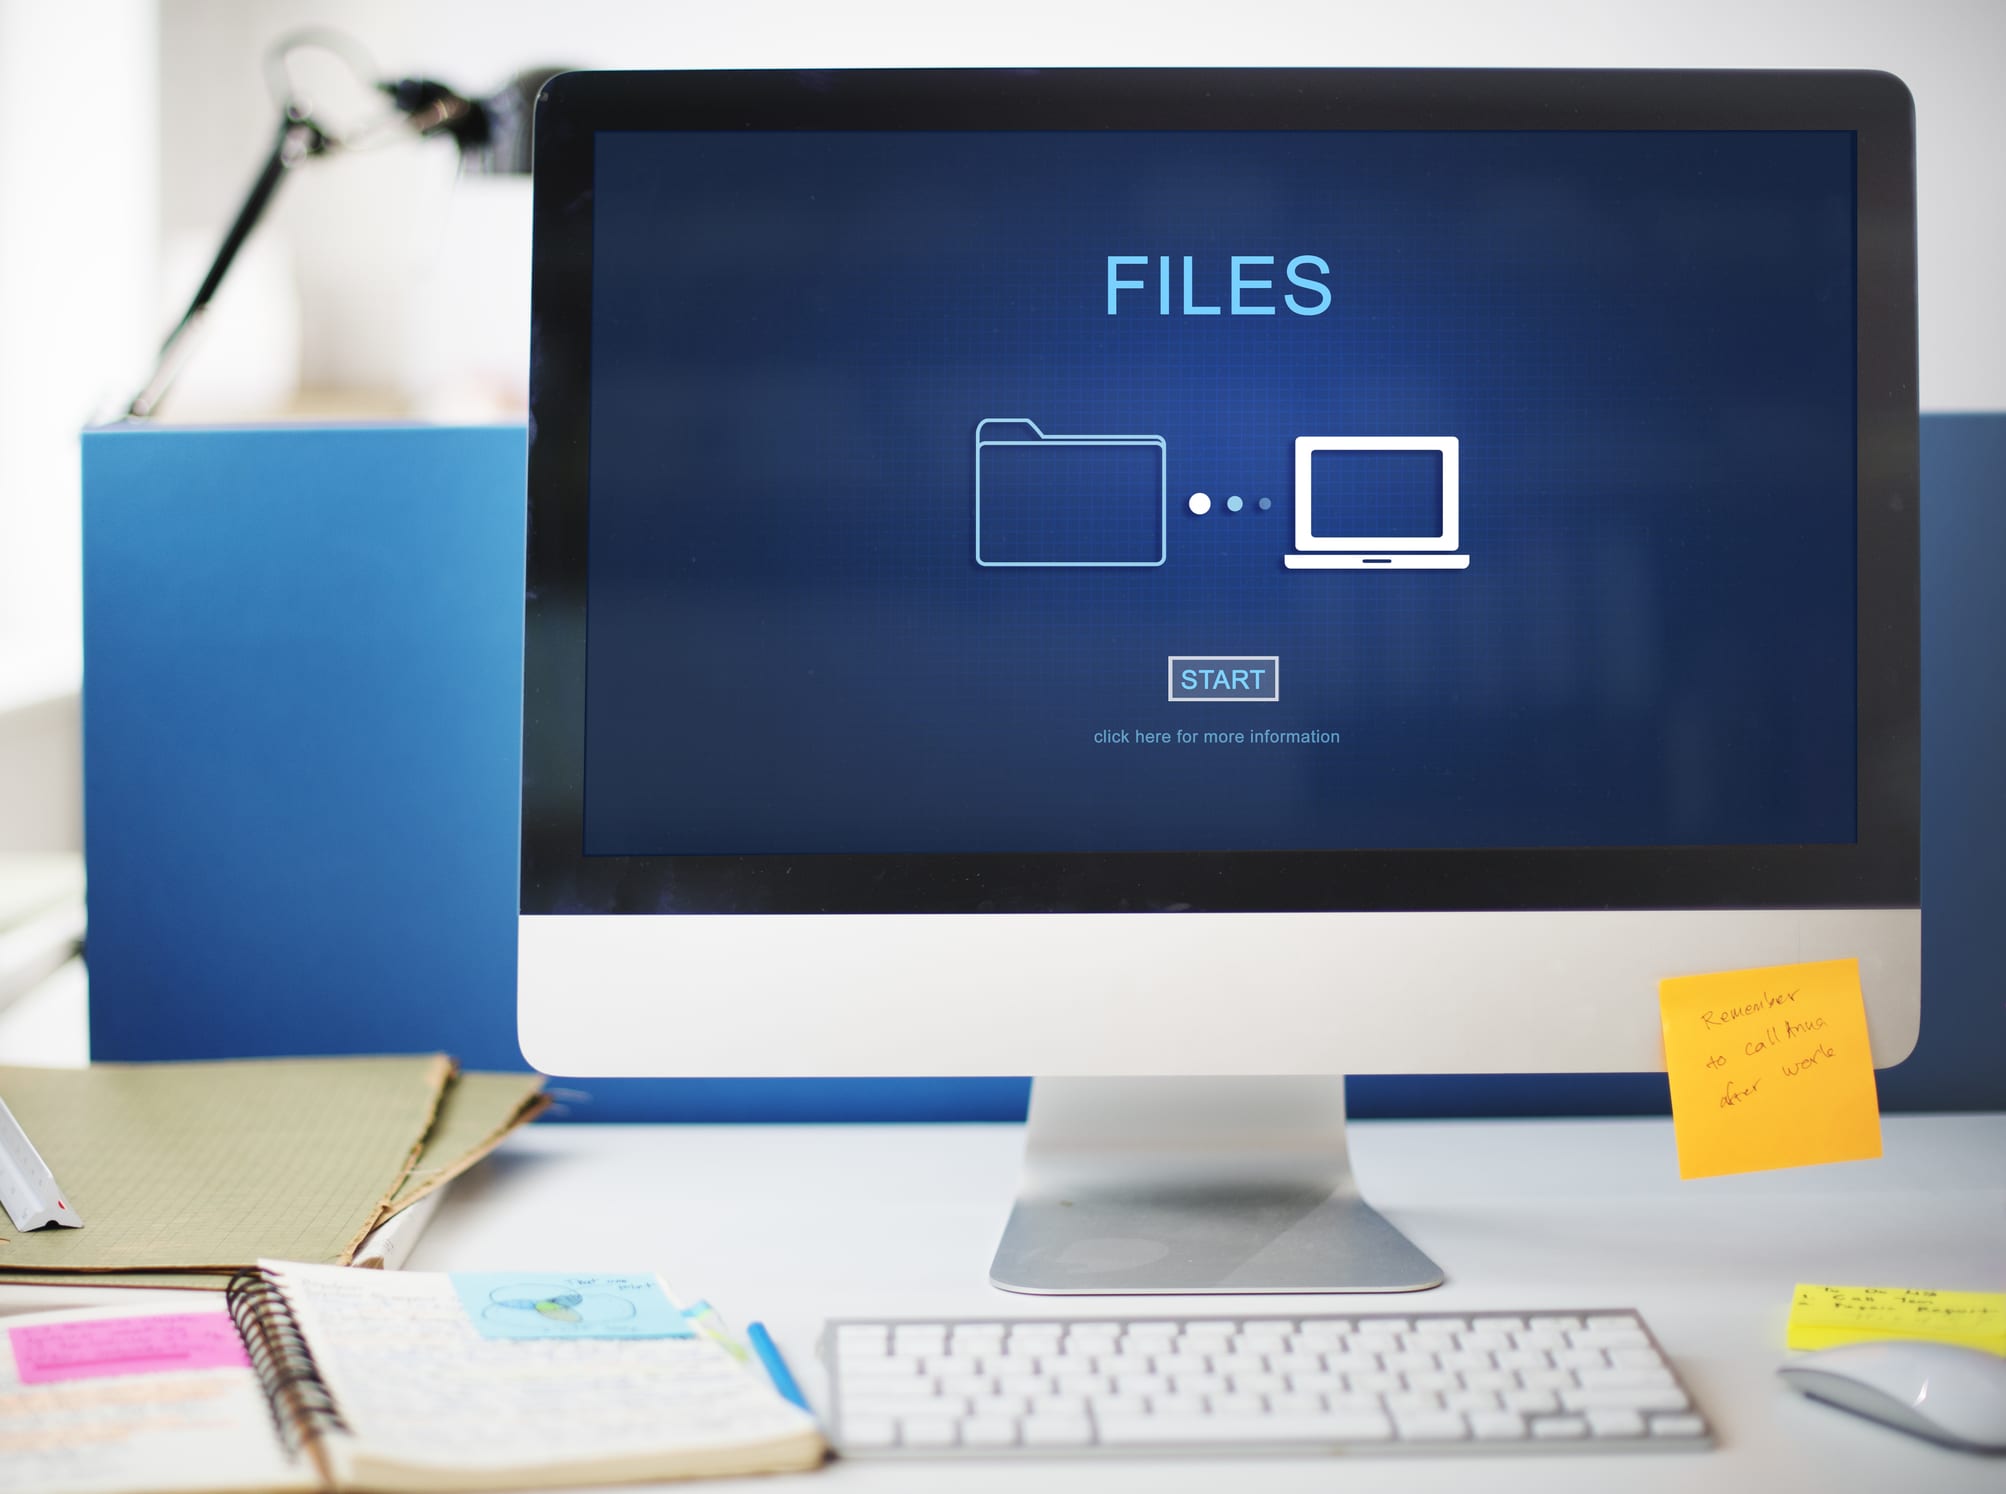 6 Practical Tips to Help You Organize Files on Your Computer